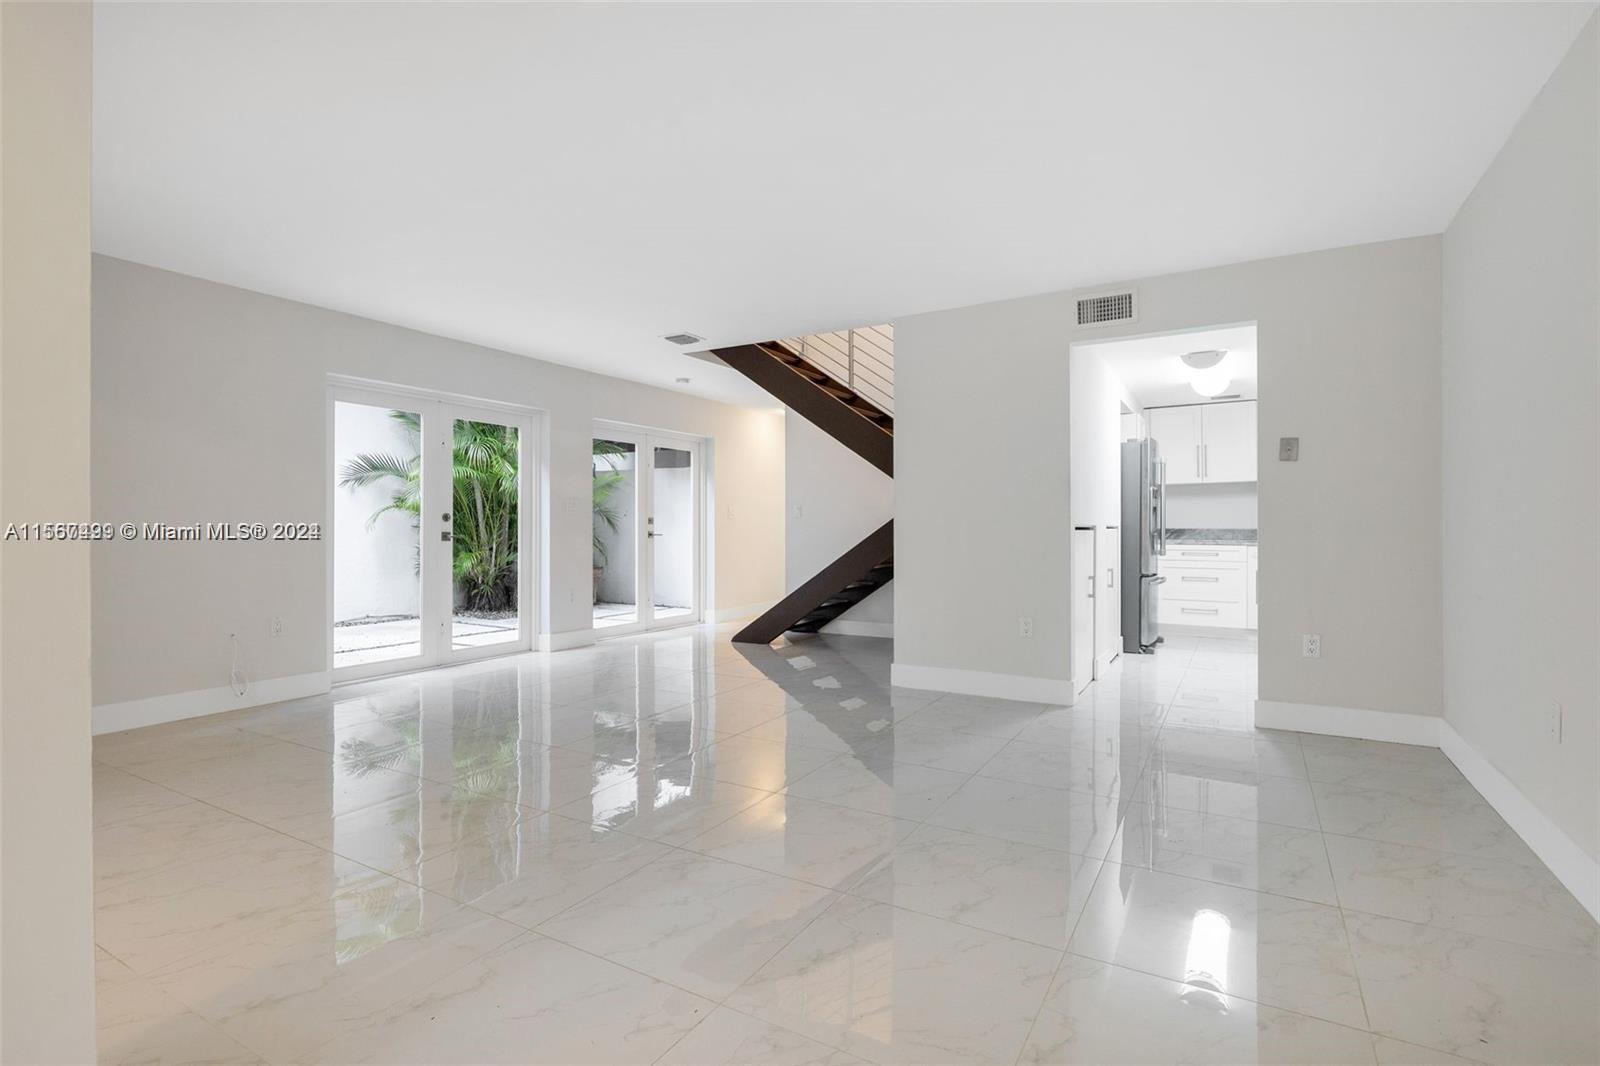 Photo of 3056 Shipping Ave #2 in Miami, FL